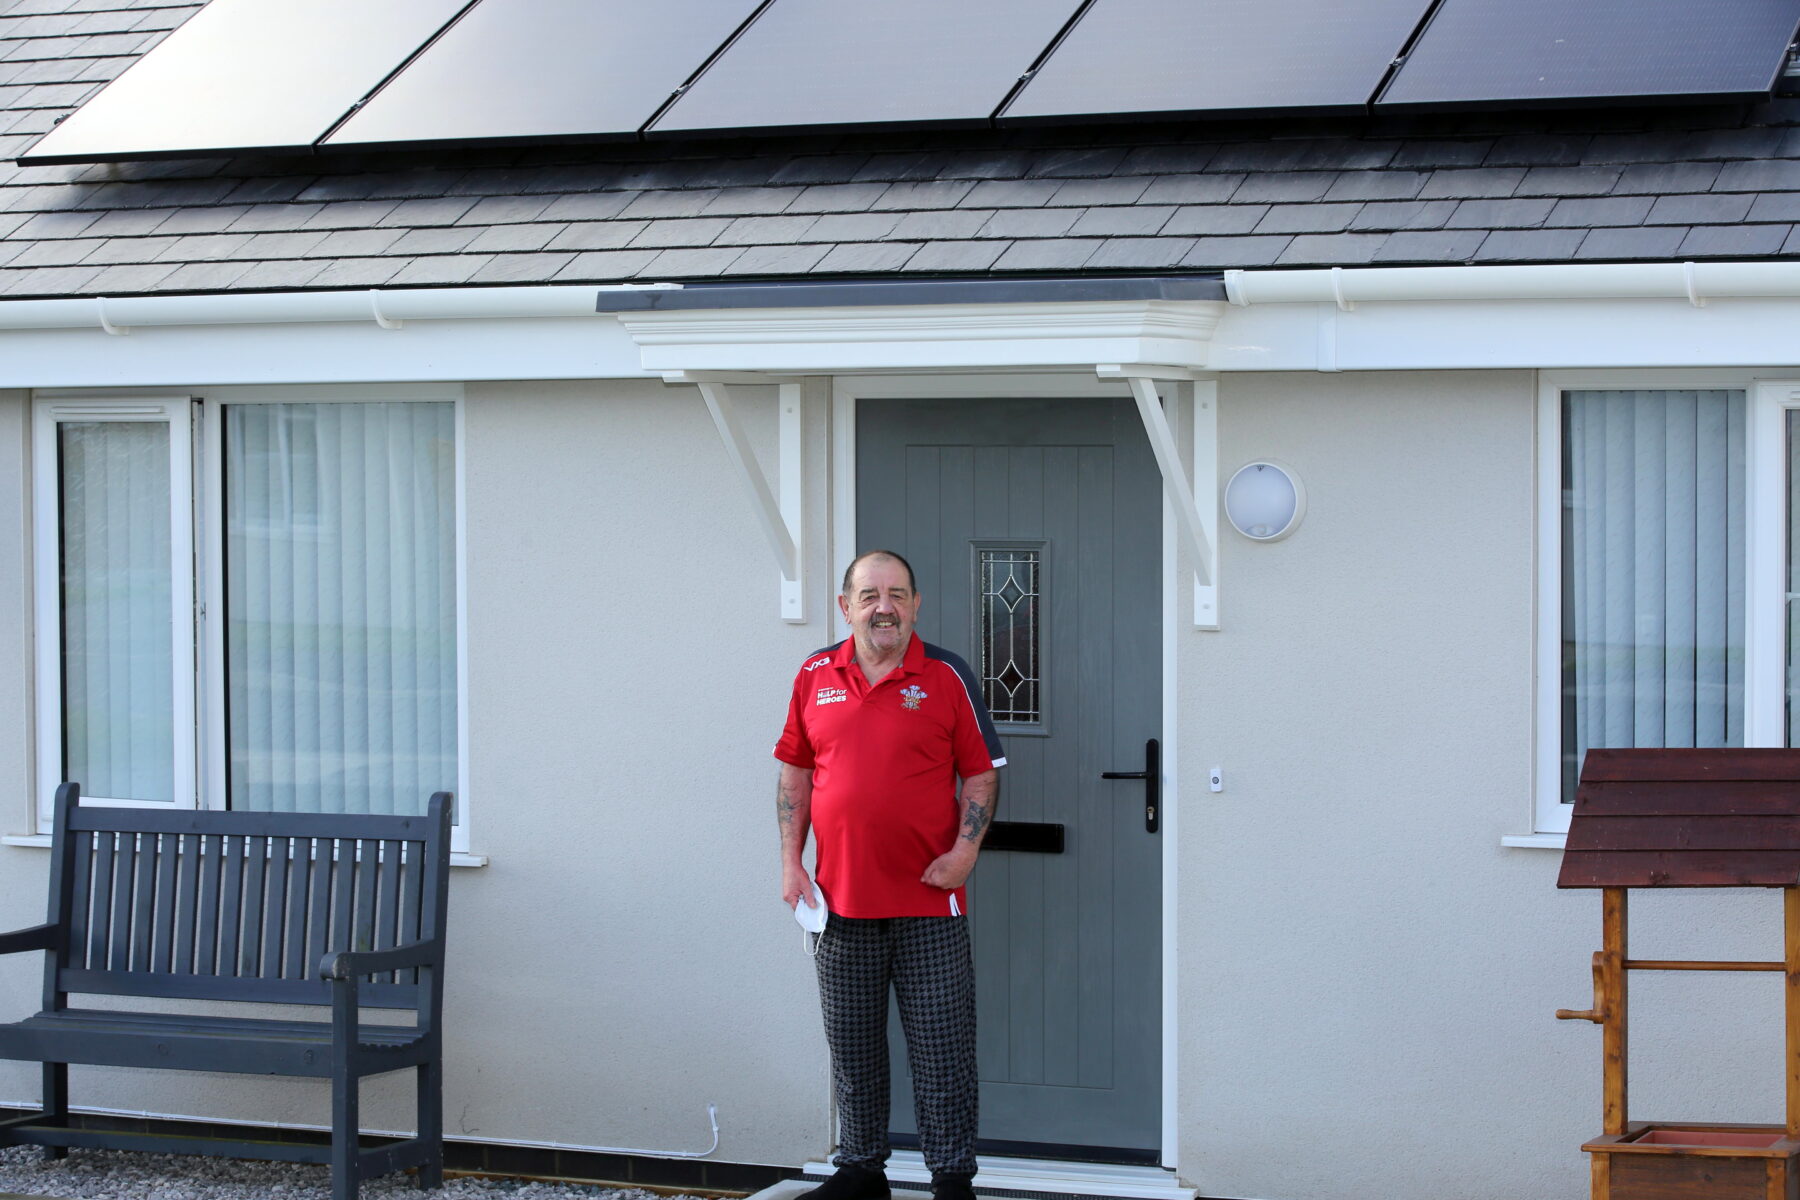 Terence Thomas outside his new Grwp Cynefin home in Llain Delyn, Gwalchmai